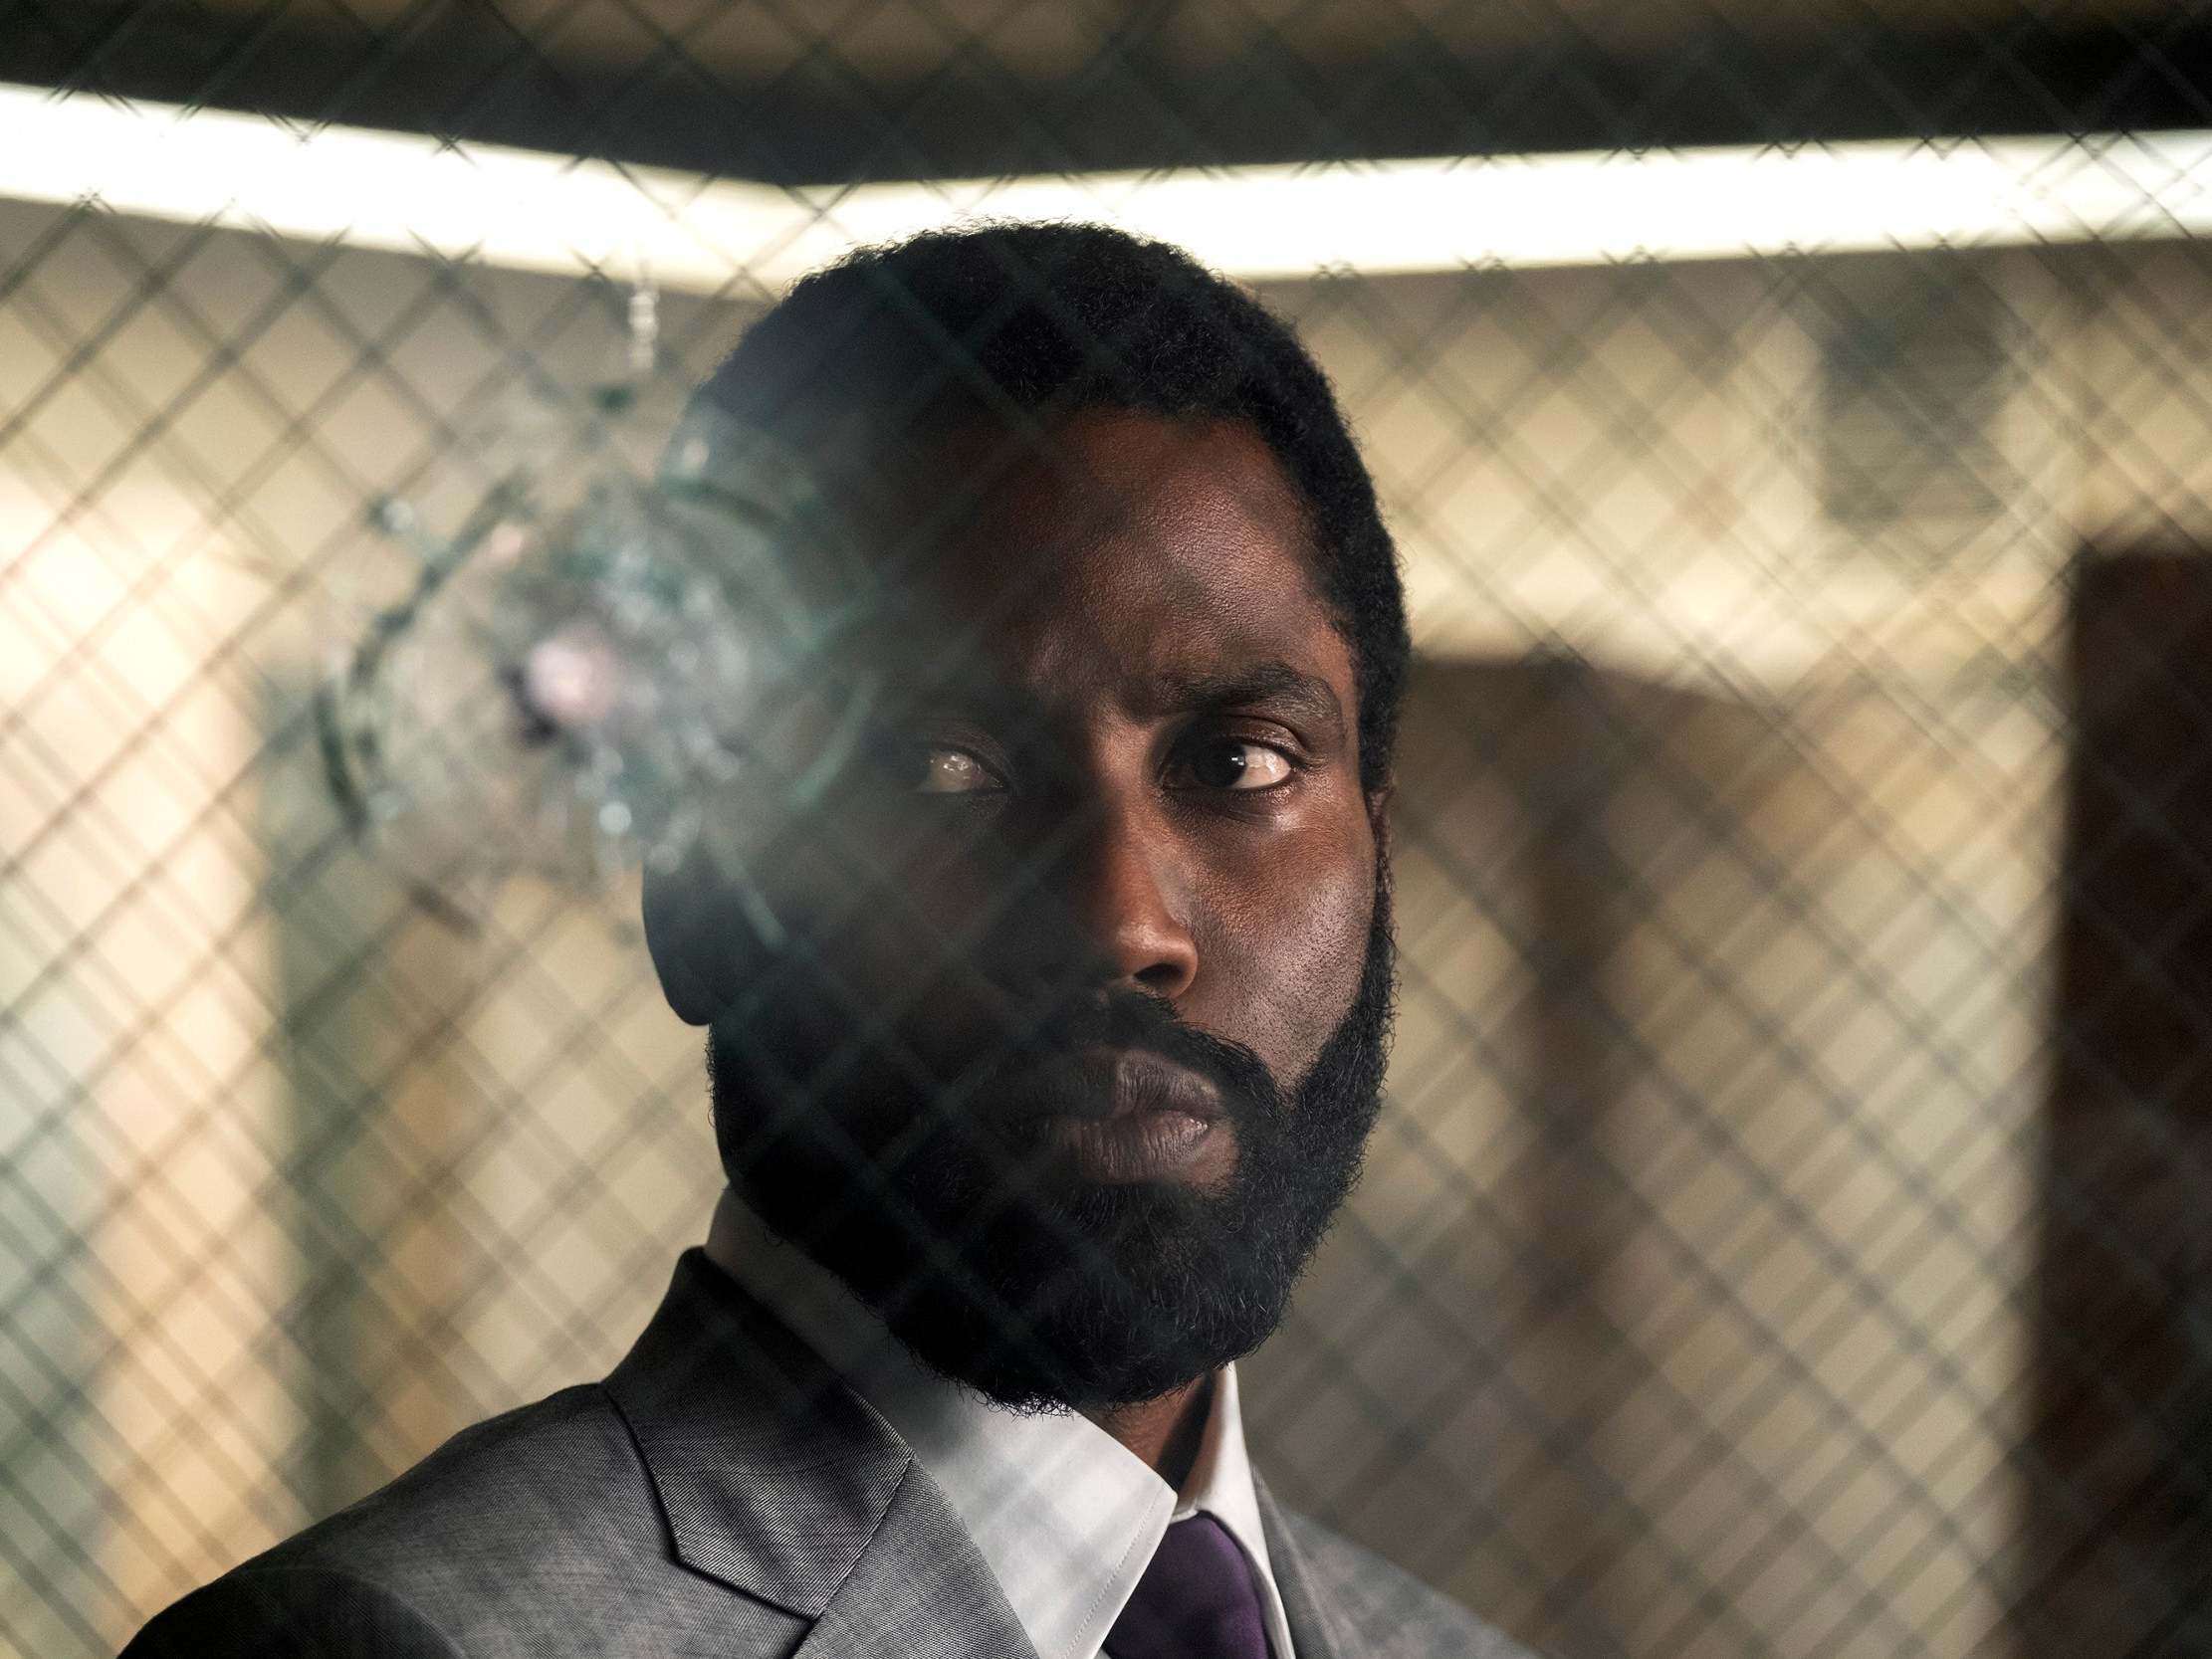 John David Washington stars as ‘The Protagonist’, who’s sent off into the world with a single palindrome: ‘Tenet’